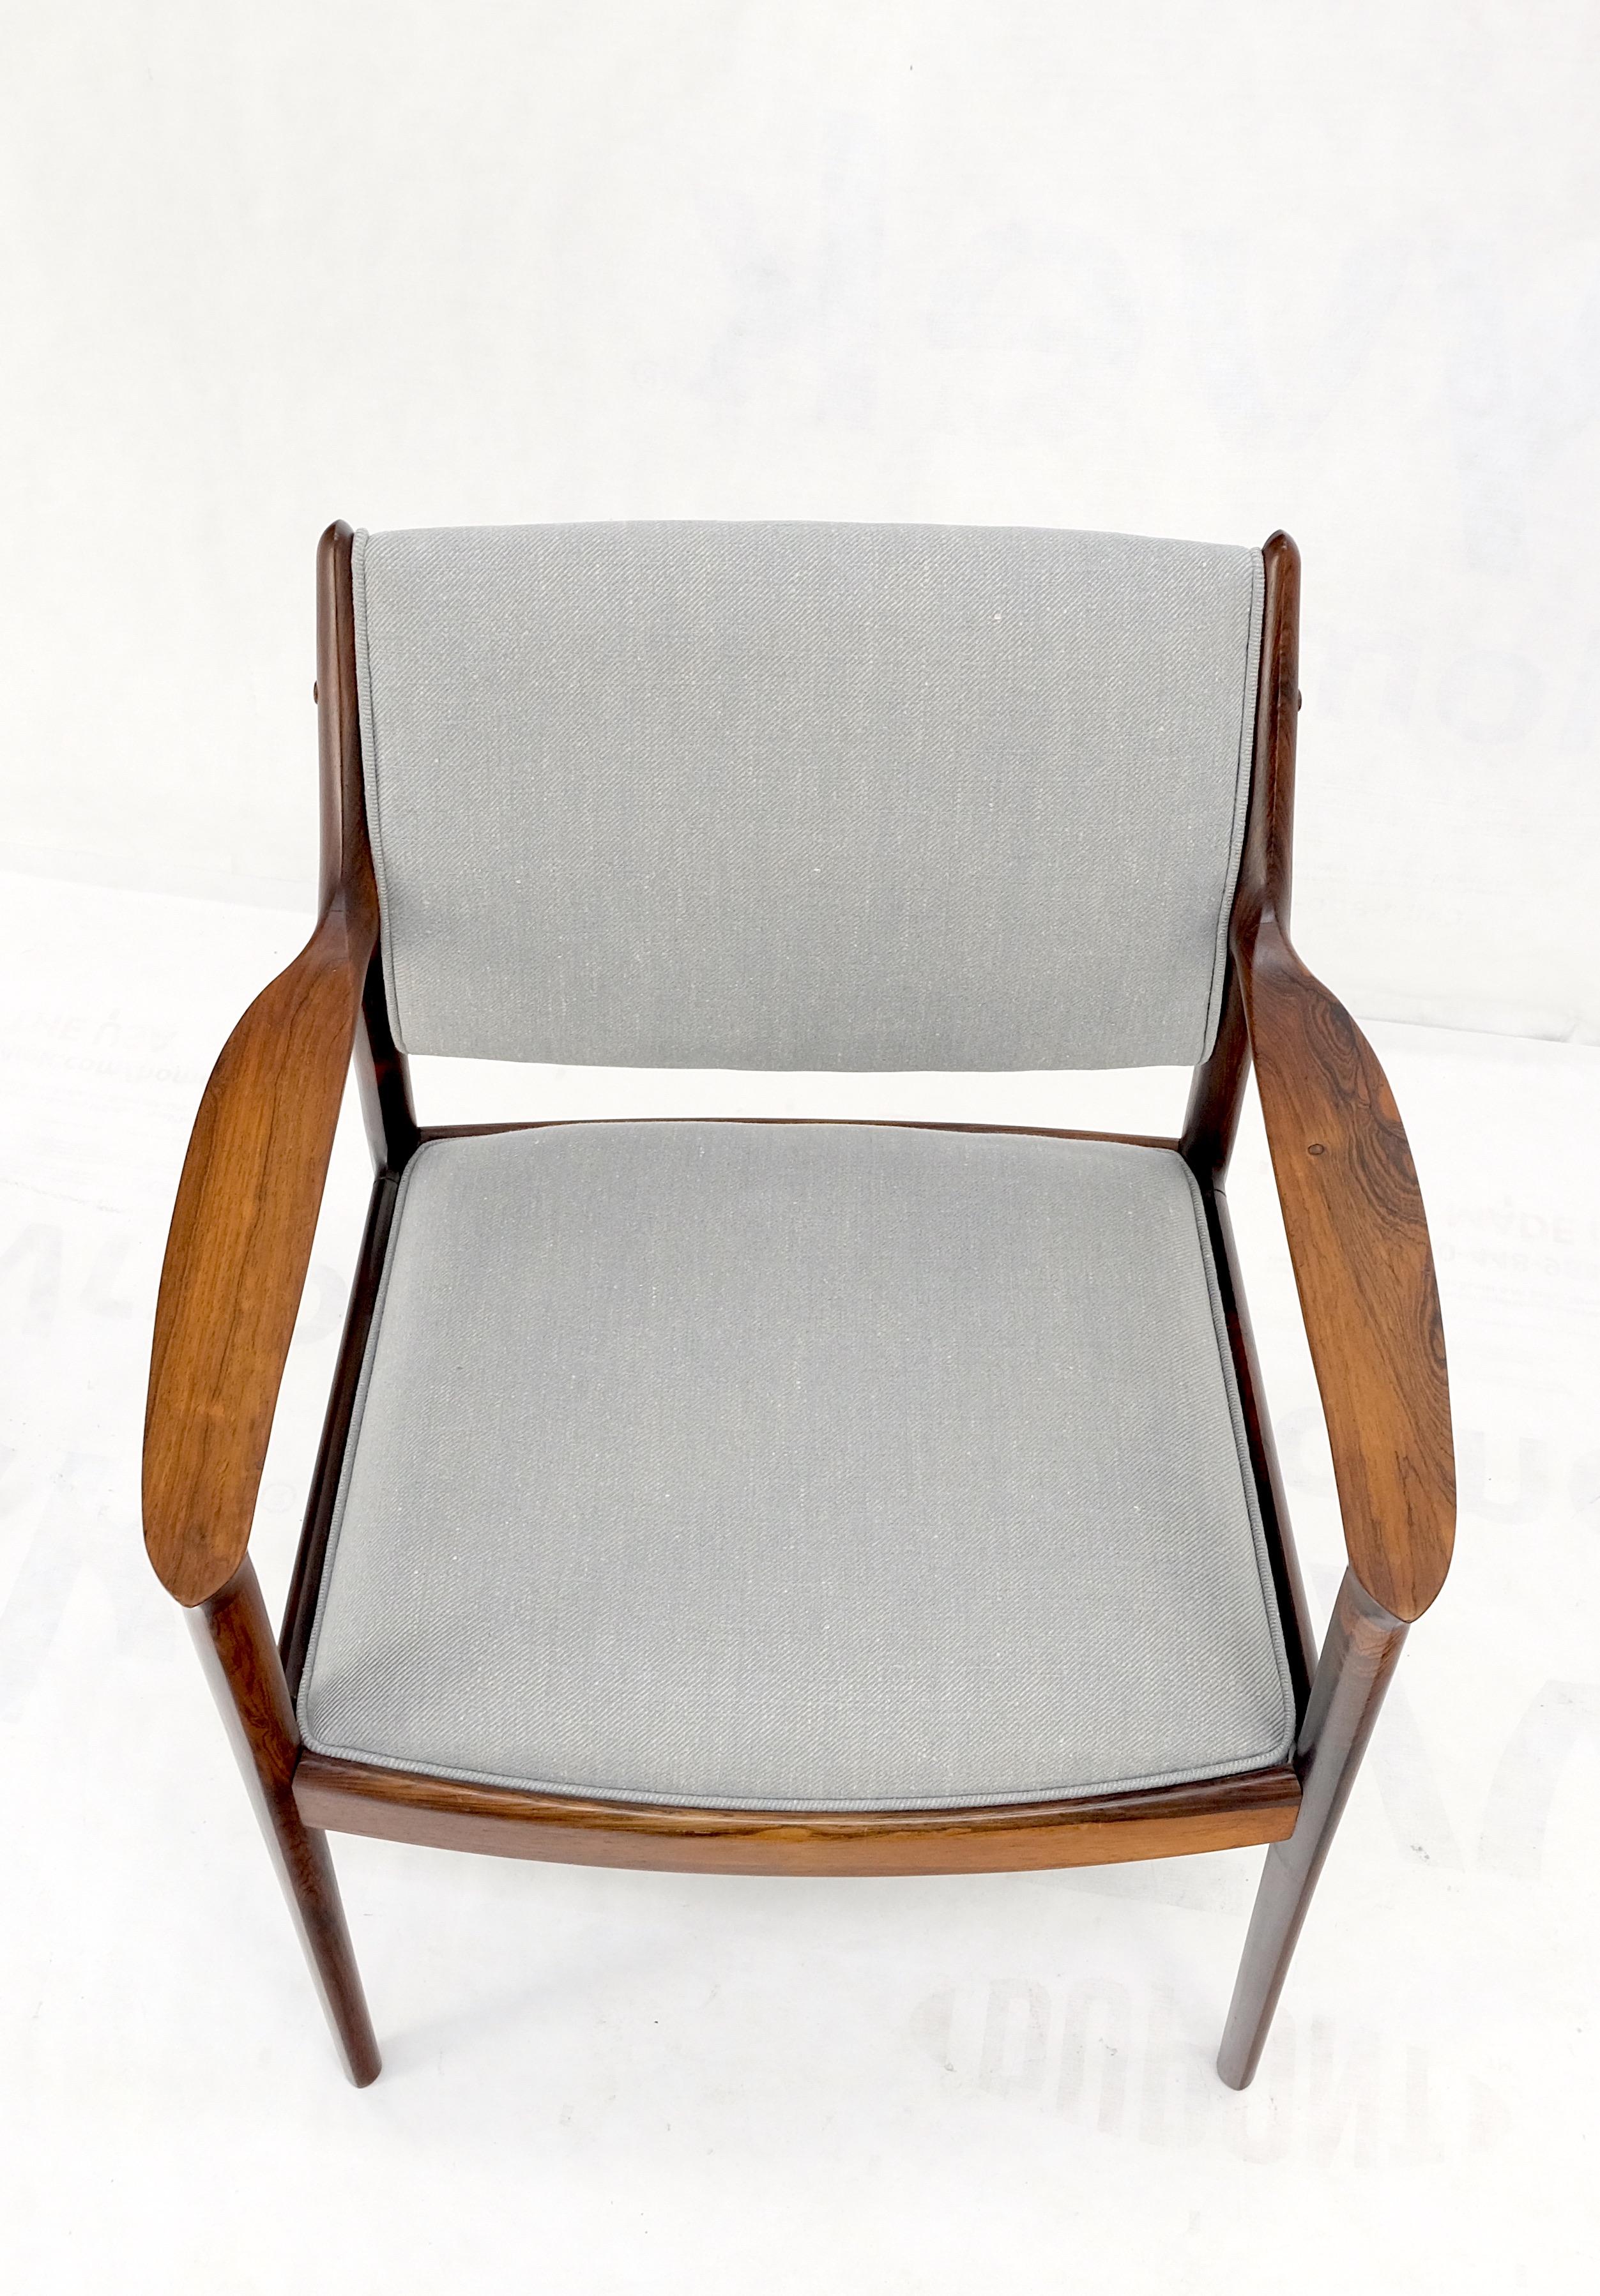 Finn Juhl Attributed Heavy Solid Rosewood Arm Desk Chair New Upholstery Mint! For Sale 5